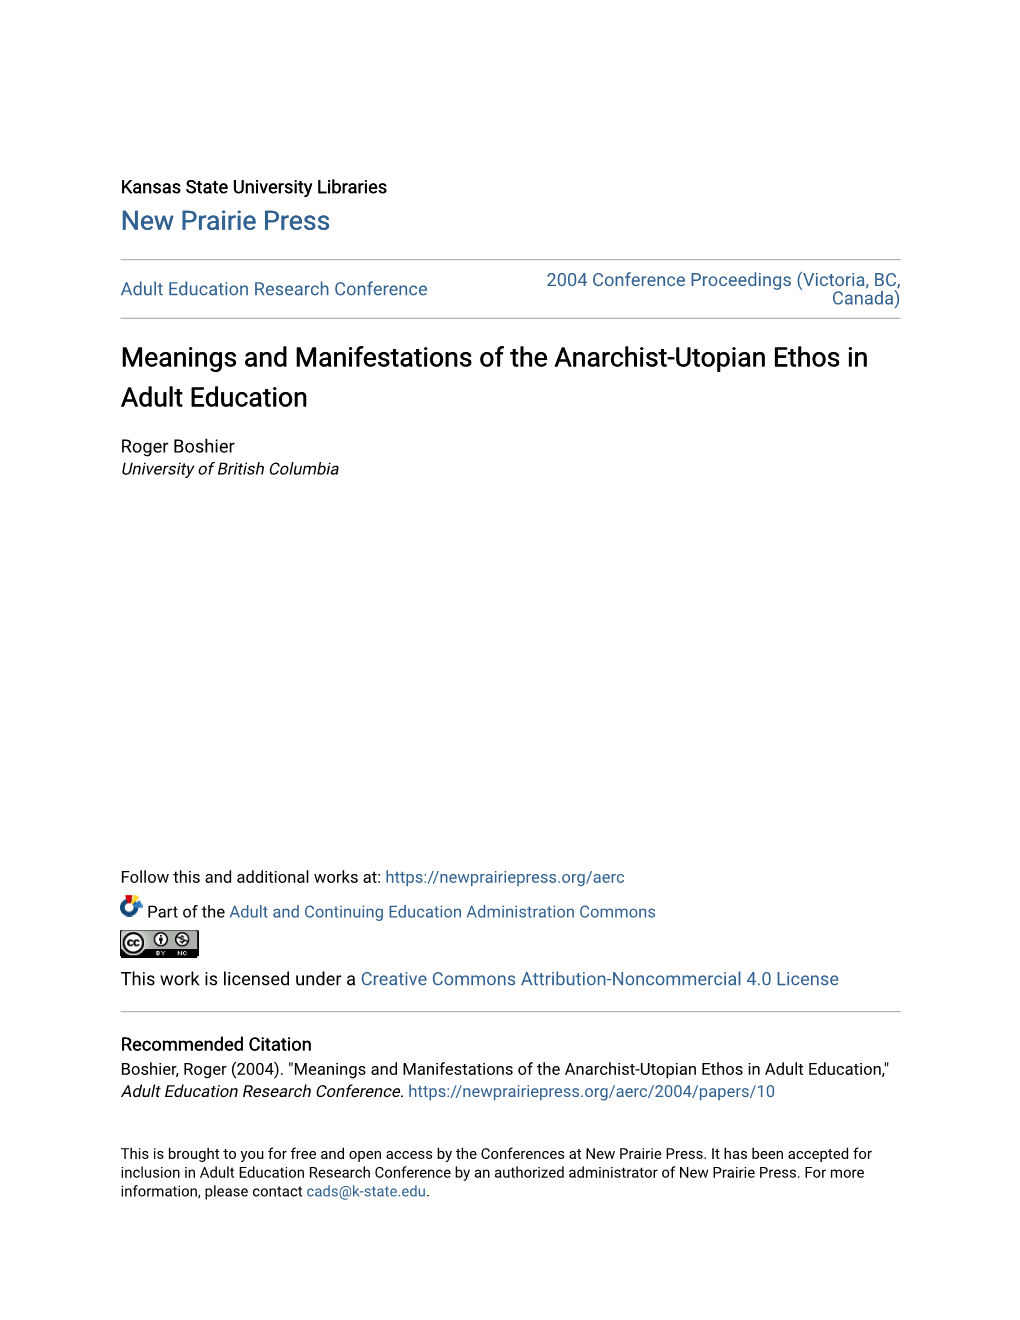 Meanings and Manifestations of the Anarchist-Utopian Ethos in Adult Education